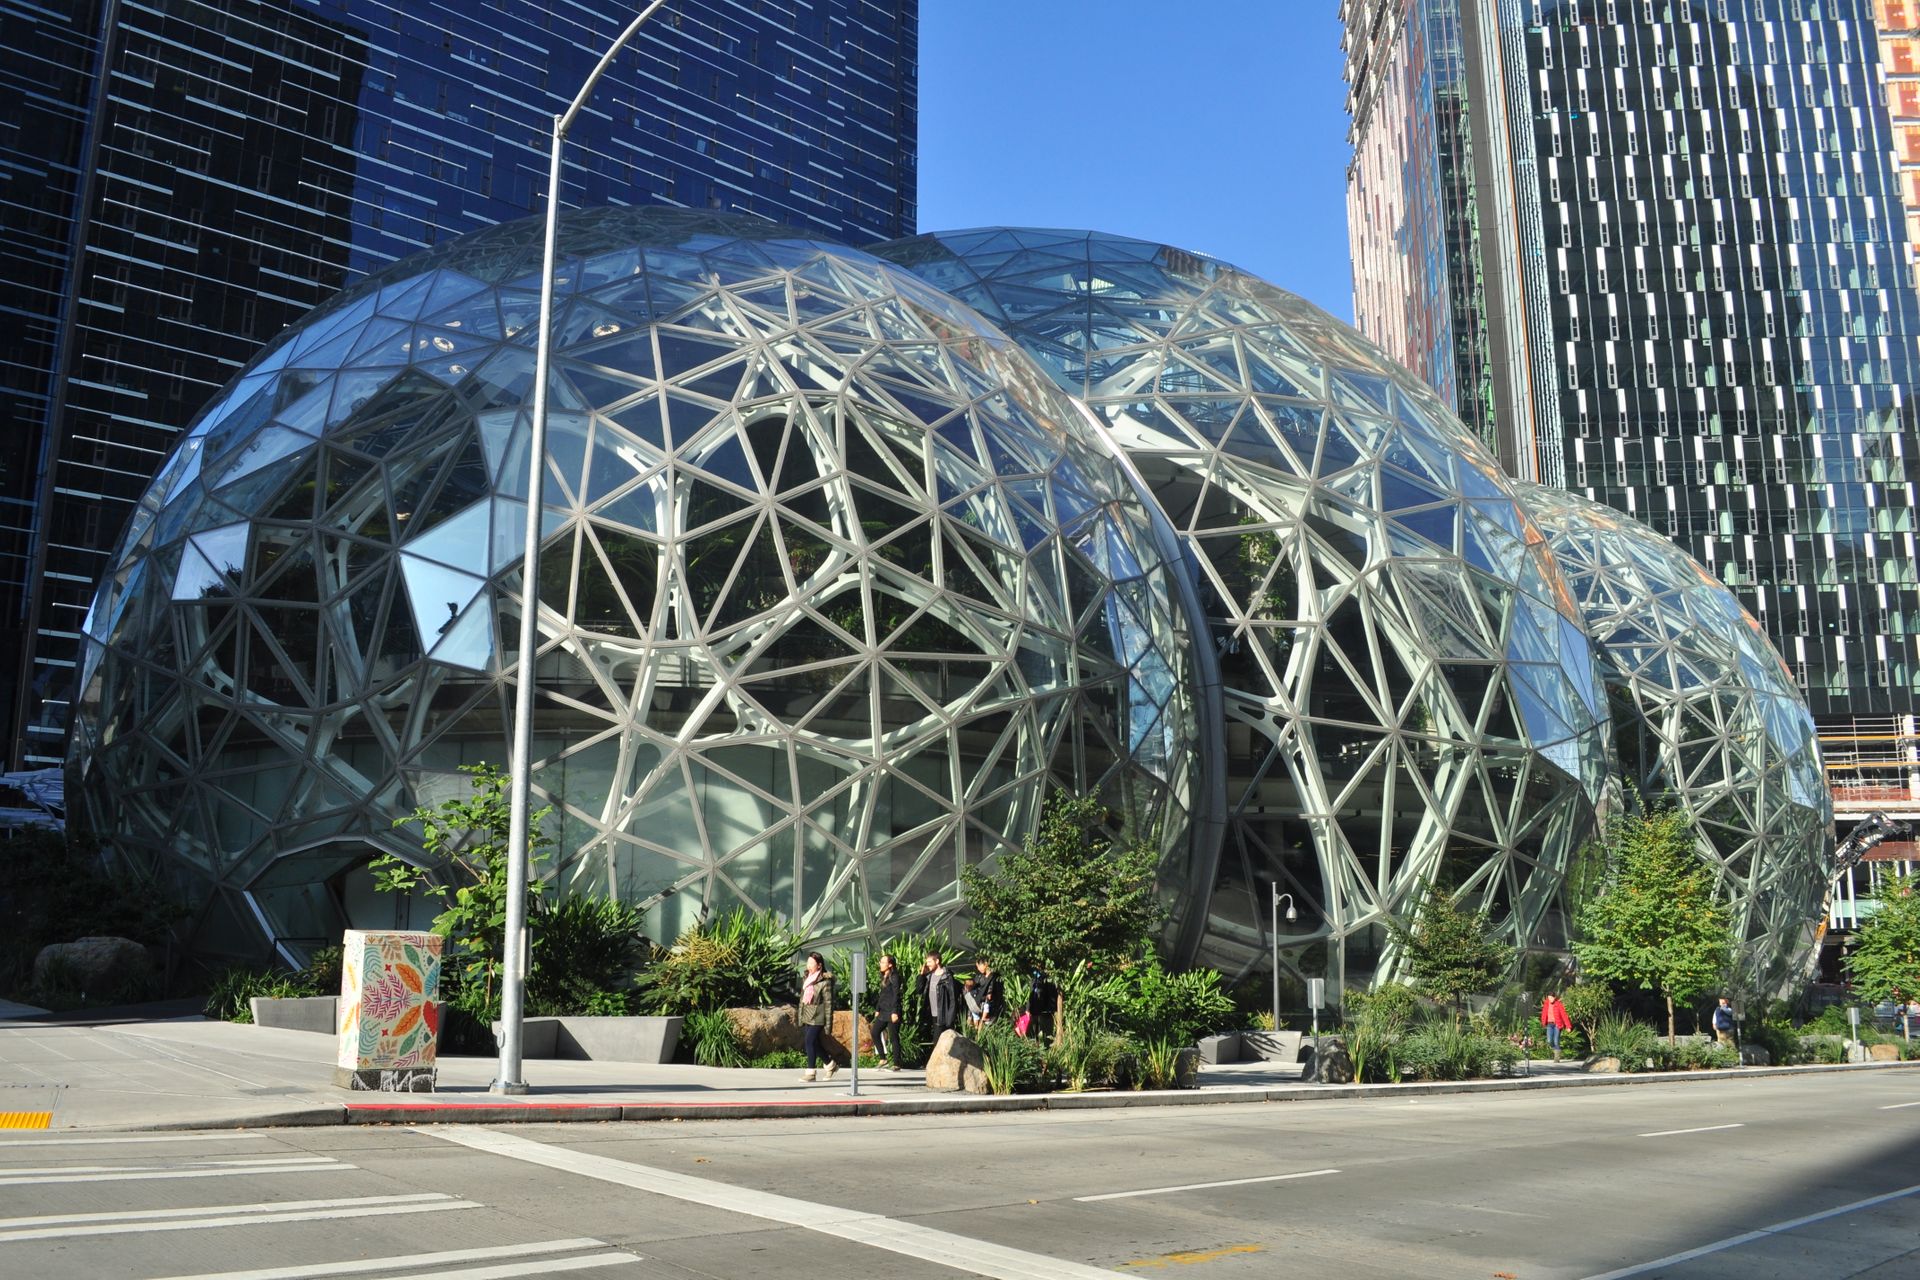 The work Spheres located directly at the Amazon headquarters in Seattle, in the US state of Washington